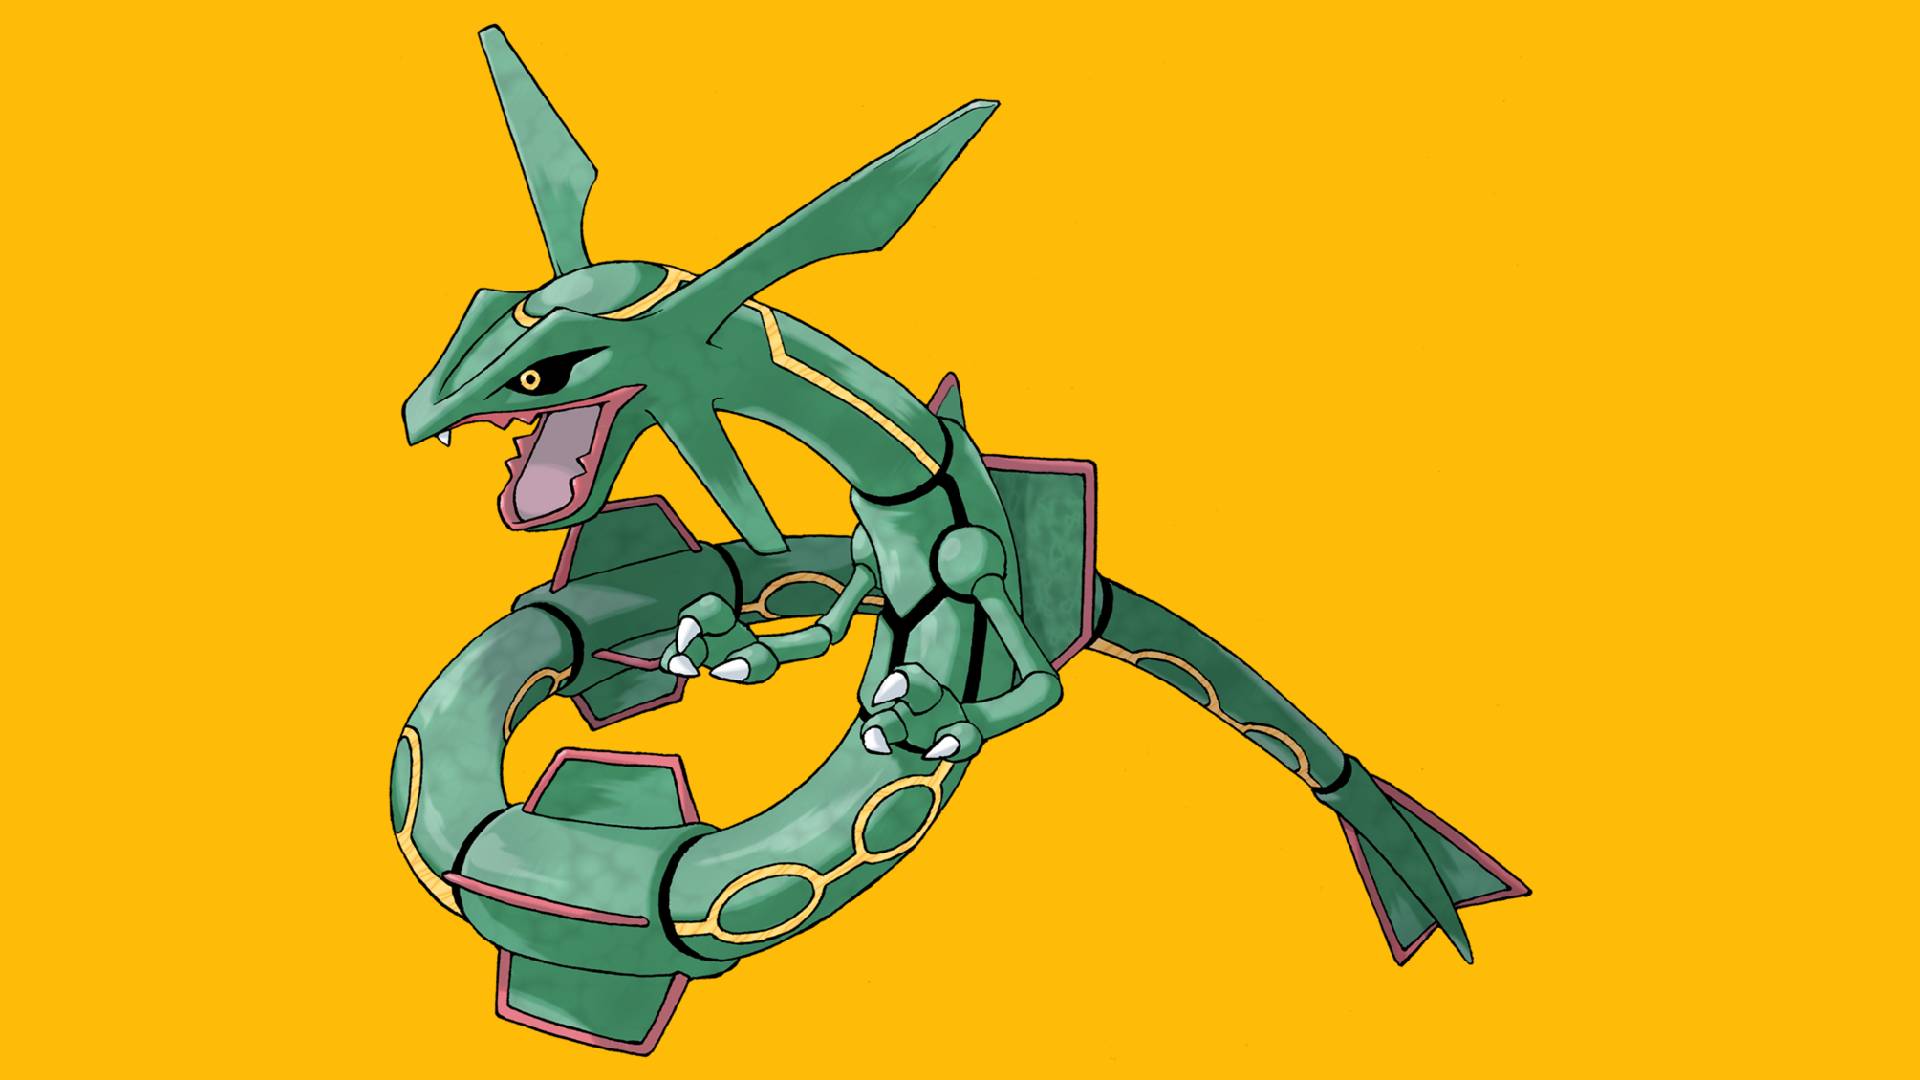 Rayquaza will soon be available to encounter in the world of